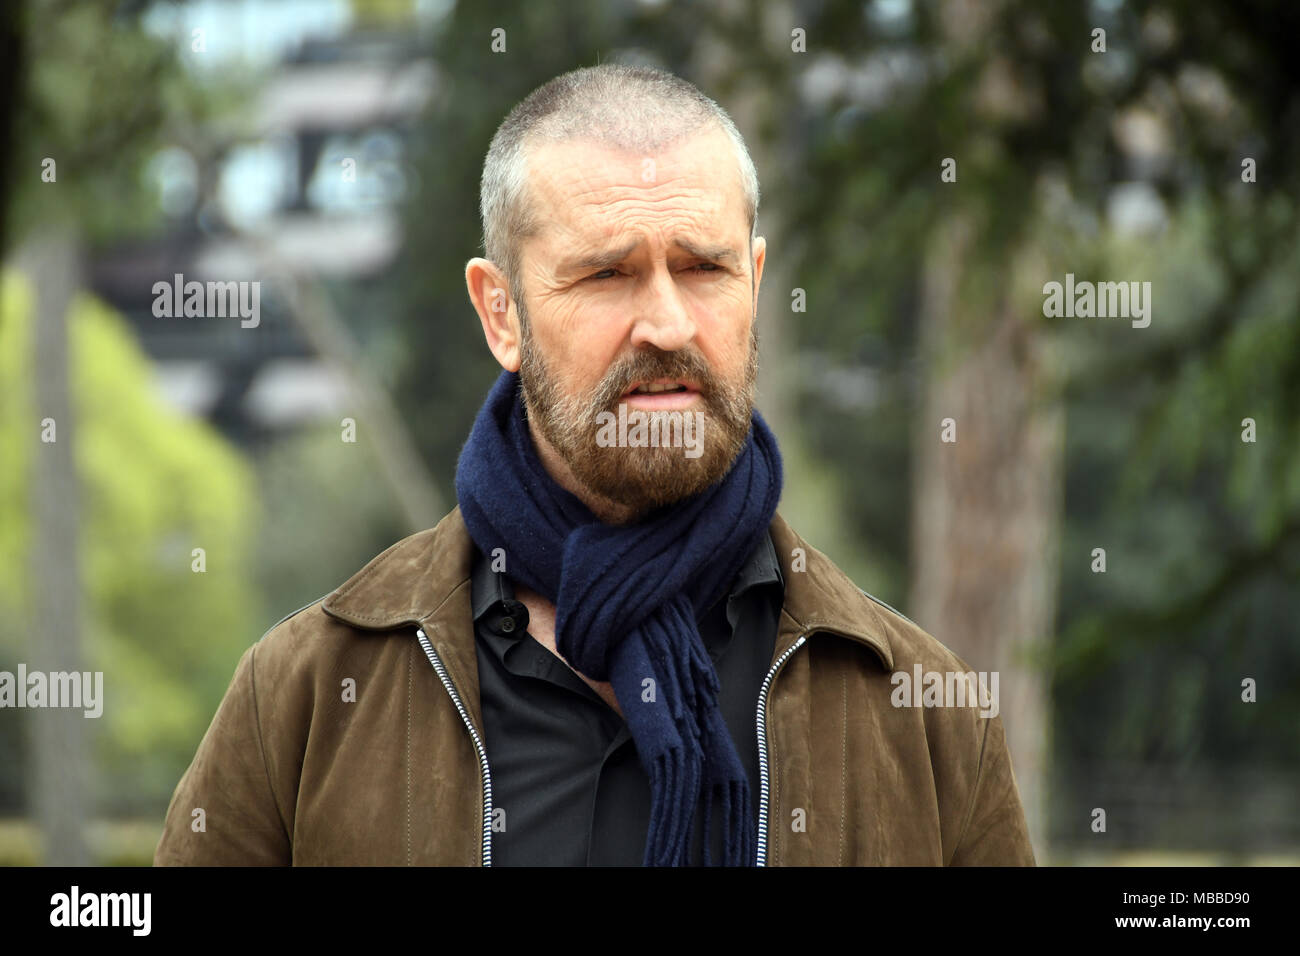 Rome Italy 10 April 2018 Cinema House - Photocall film presentation THE HAPPY PRINCE L'ULTIMO RITRATTO DI OSCAR WILDE, Rupert Everett protagonist and director of the film. Credit: Giuseppe Andidero/Alamy Live News Stock Photo